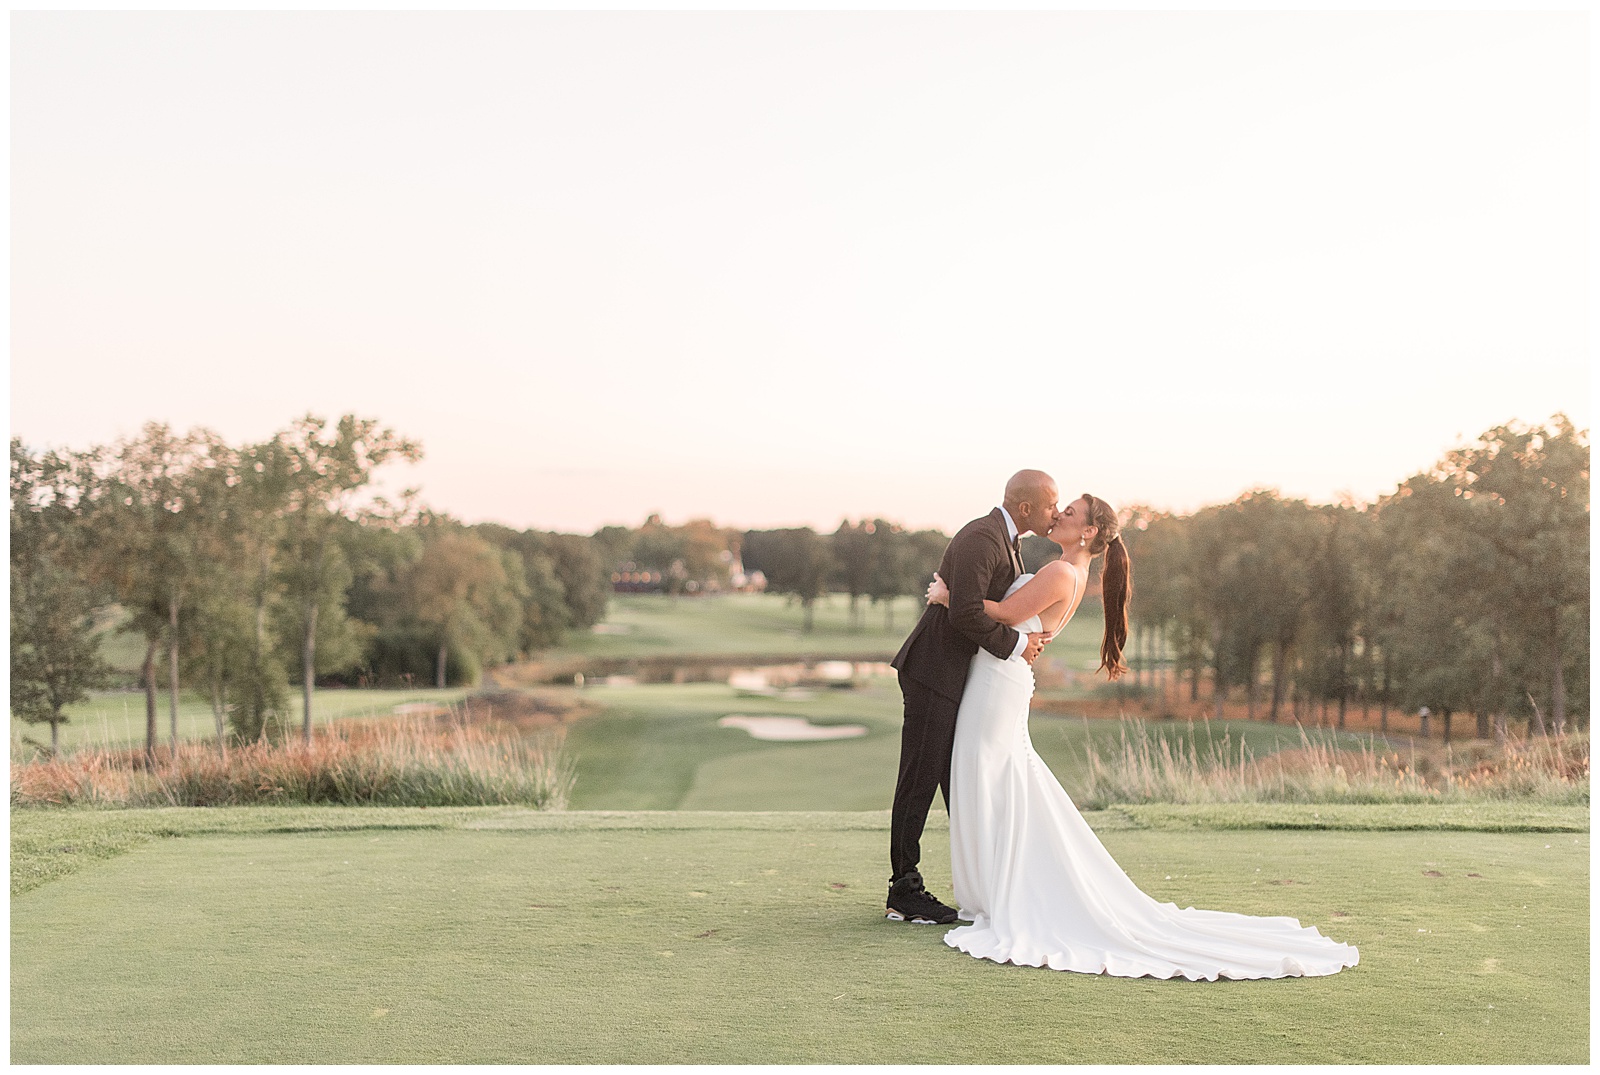 groom slightly dipping his bride back as they kiss standing on golf green at country club in new jersey on sunny day